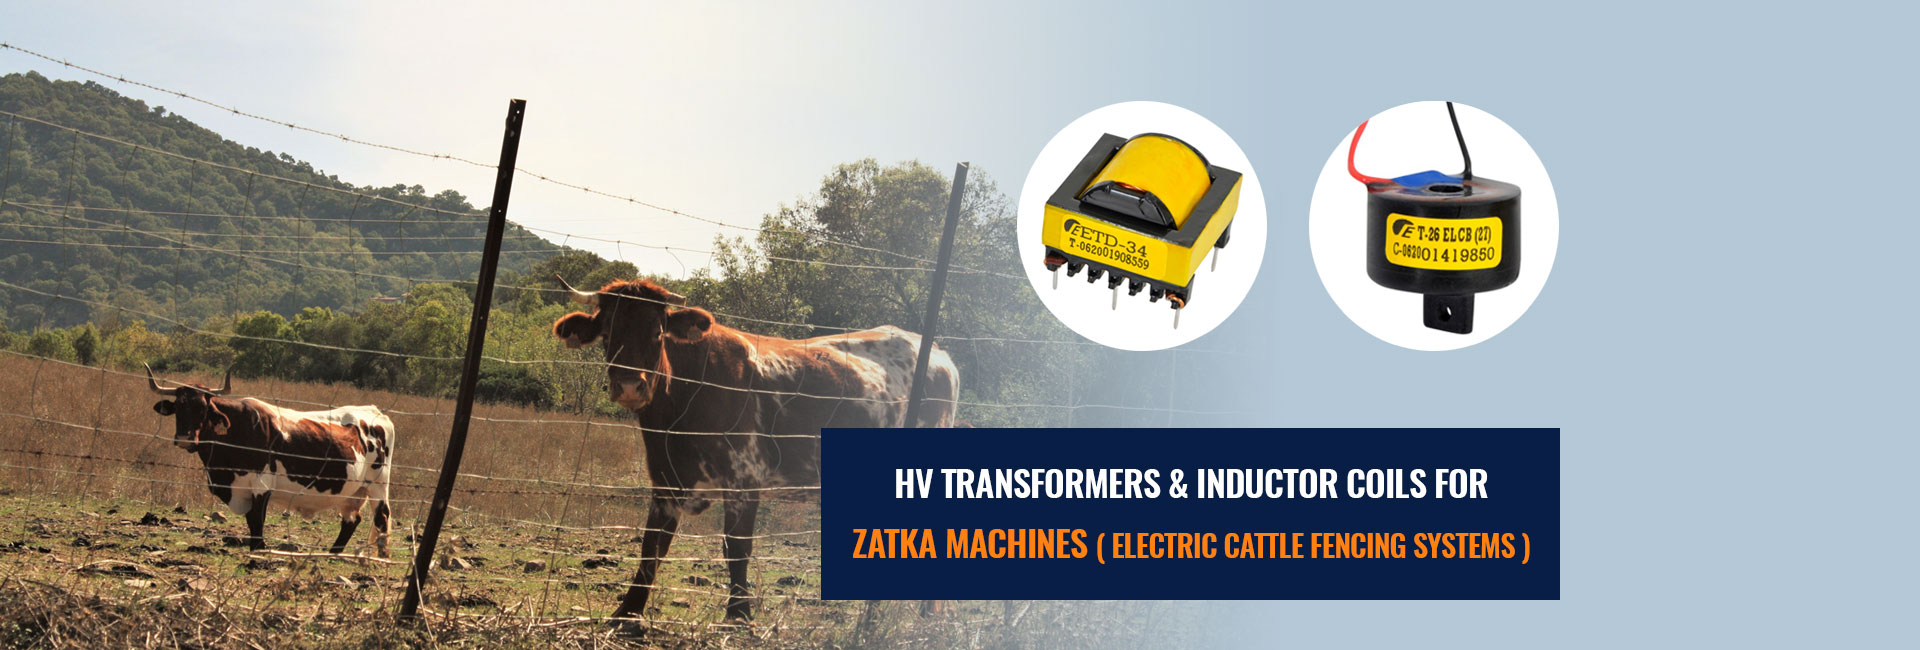 HV Transformers & Inductor Coils for Zatka Machines